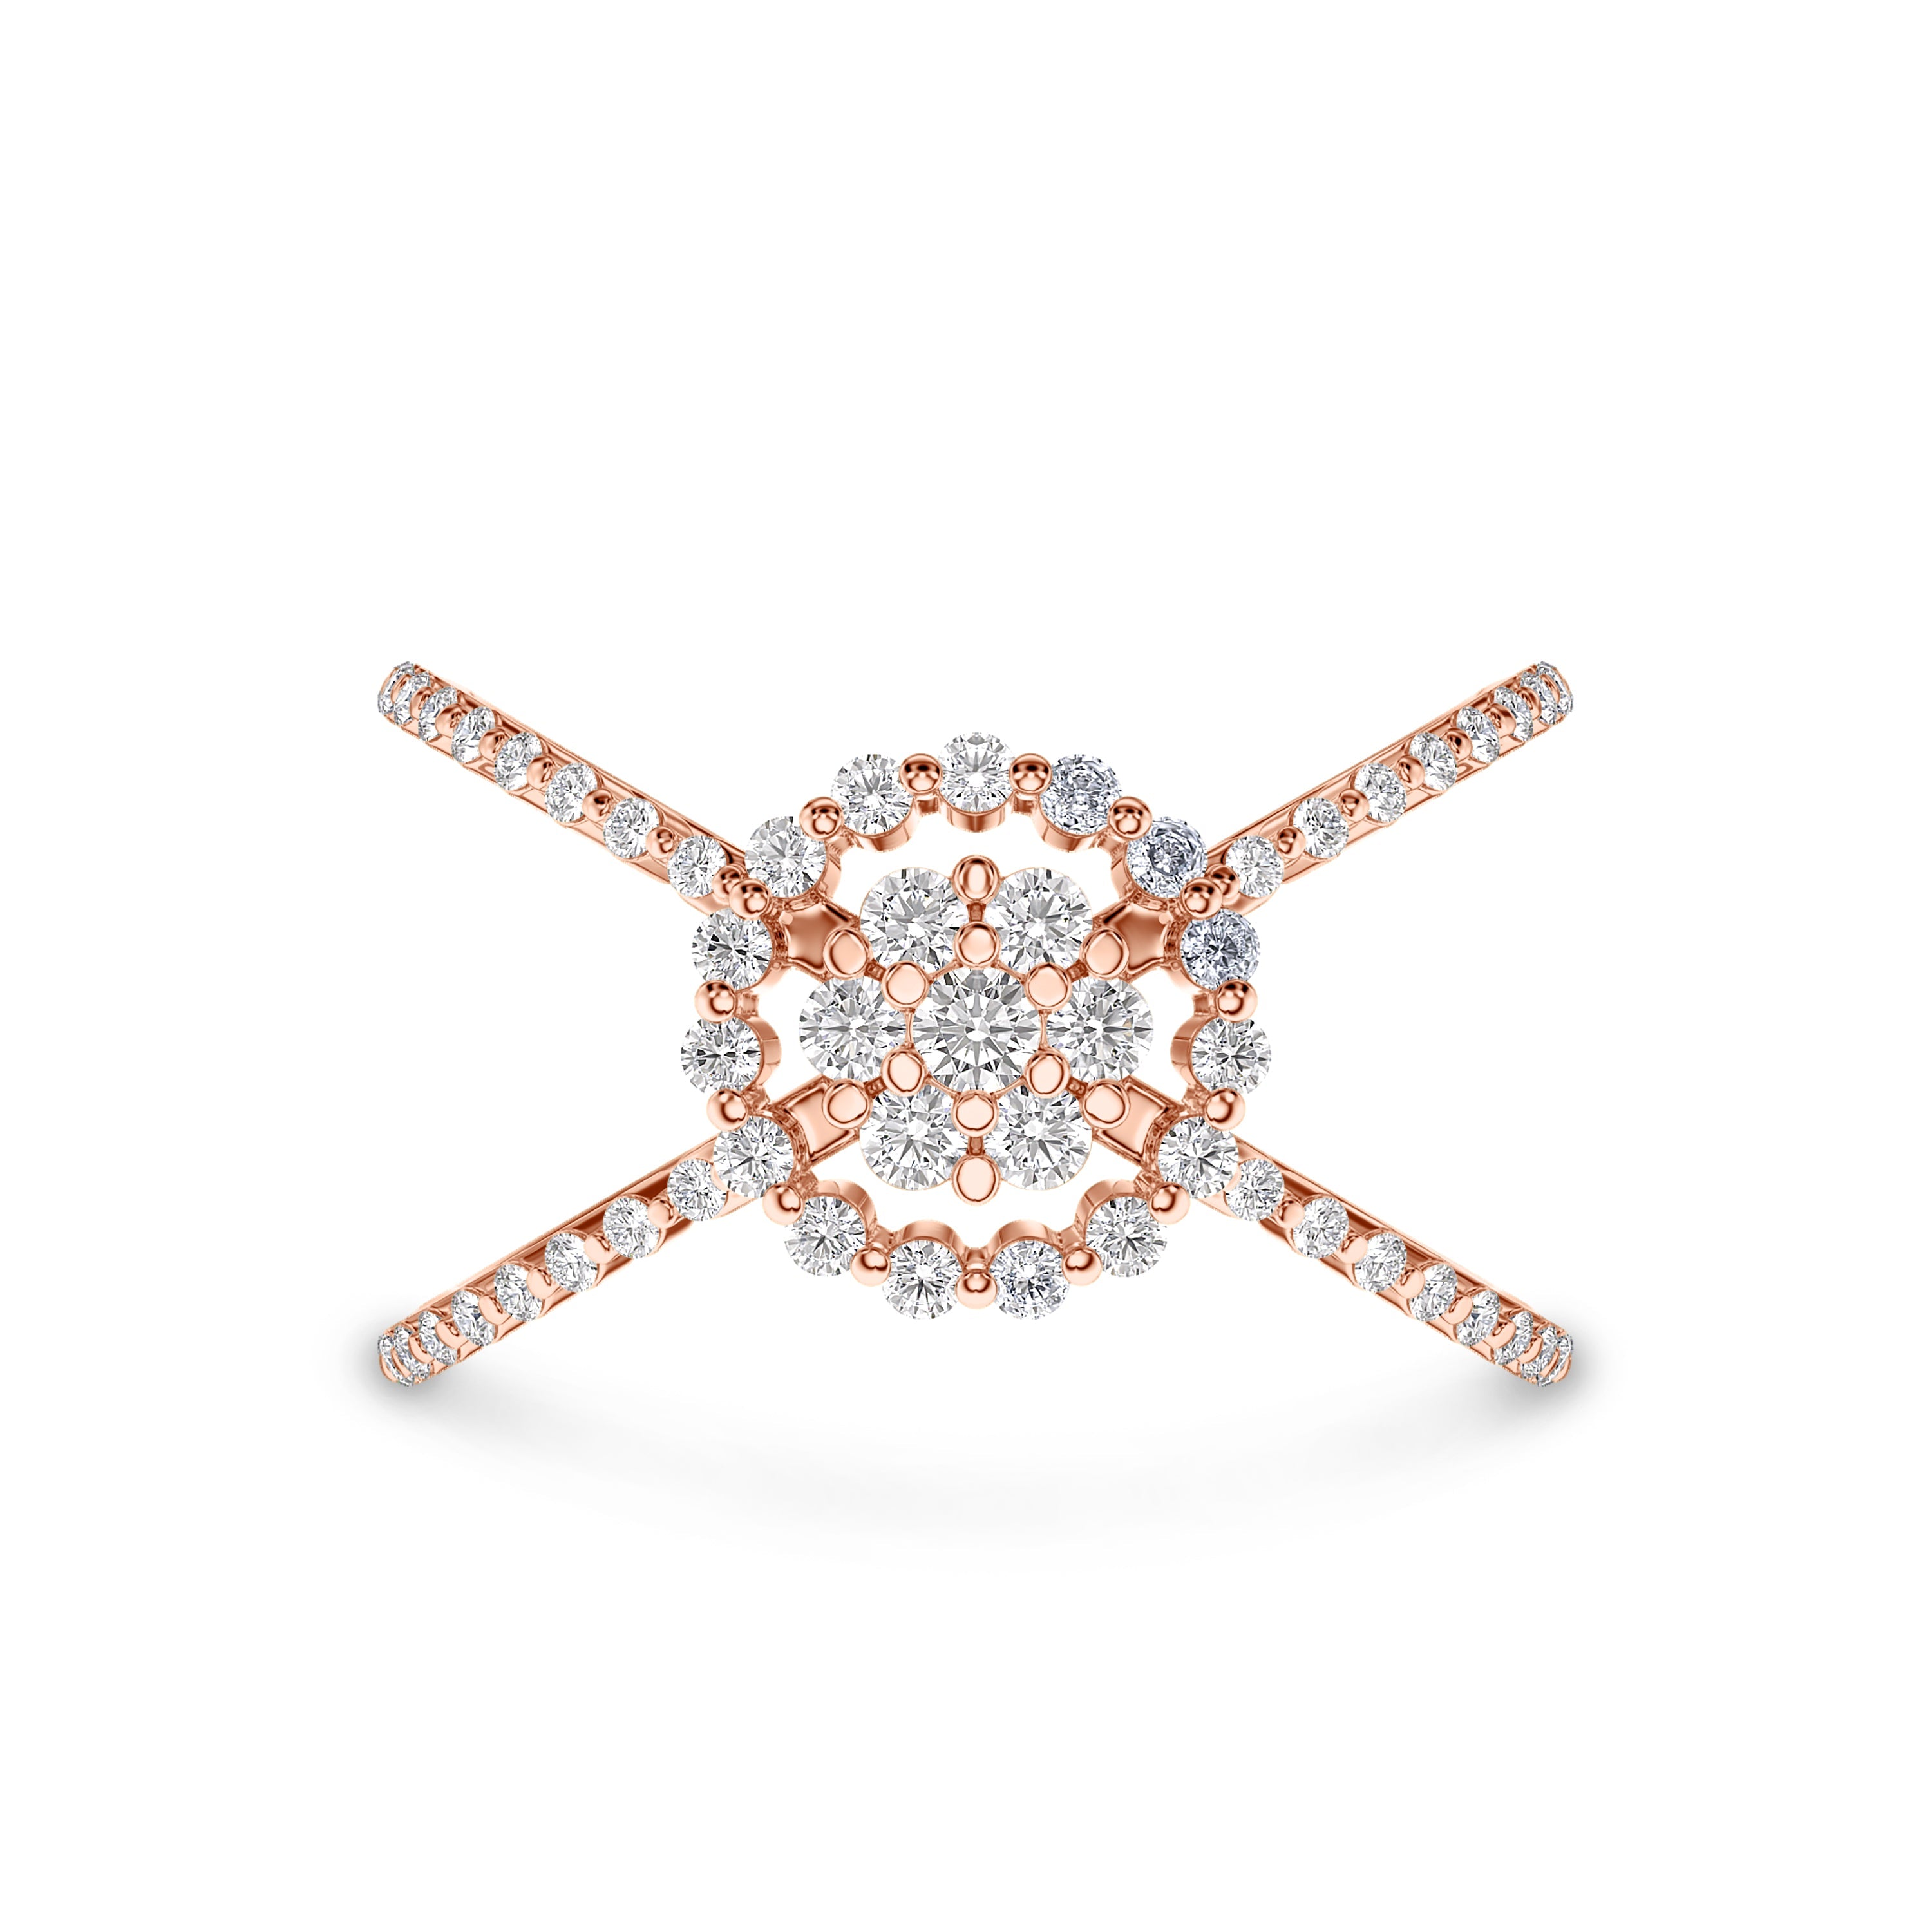 18K criss cross orbit ring in rose gold, 0.52 carat, FG color and SI clarity